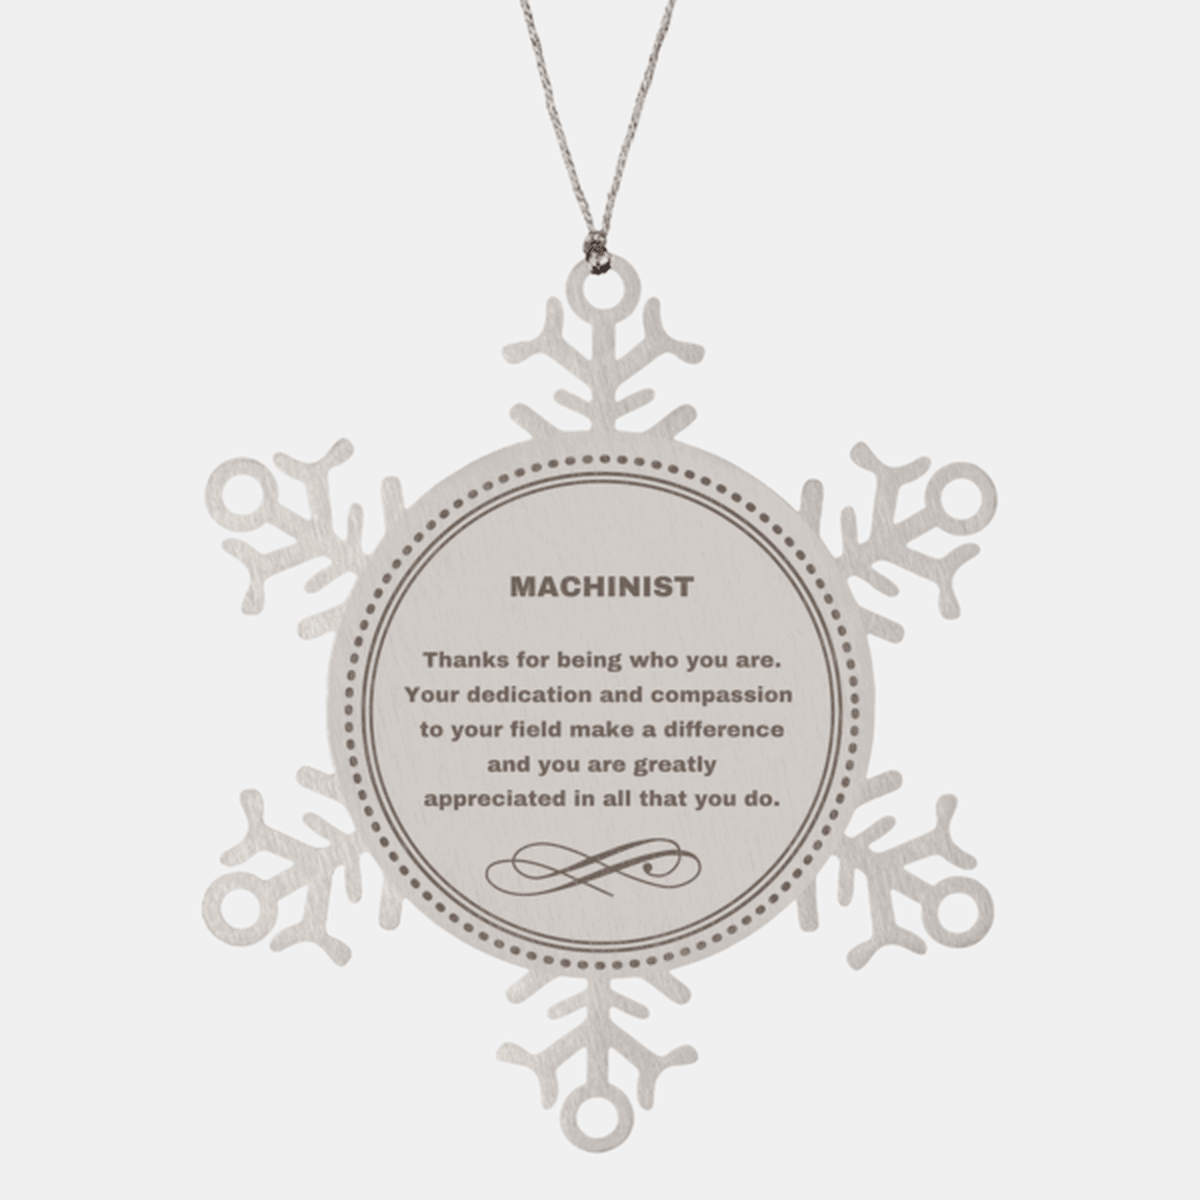 Machinist Snowflake Ornament - Thanks for being who you are - Birthday Christmas Jewelry Gifts Coworkers Colleague Boss - Mallard Moon Gift Shop